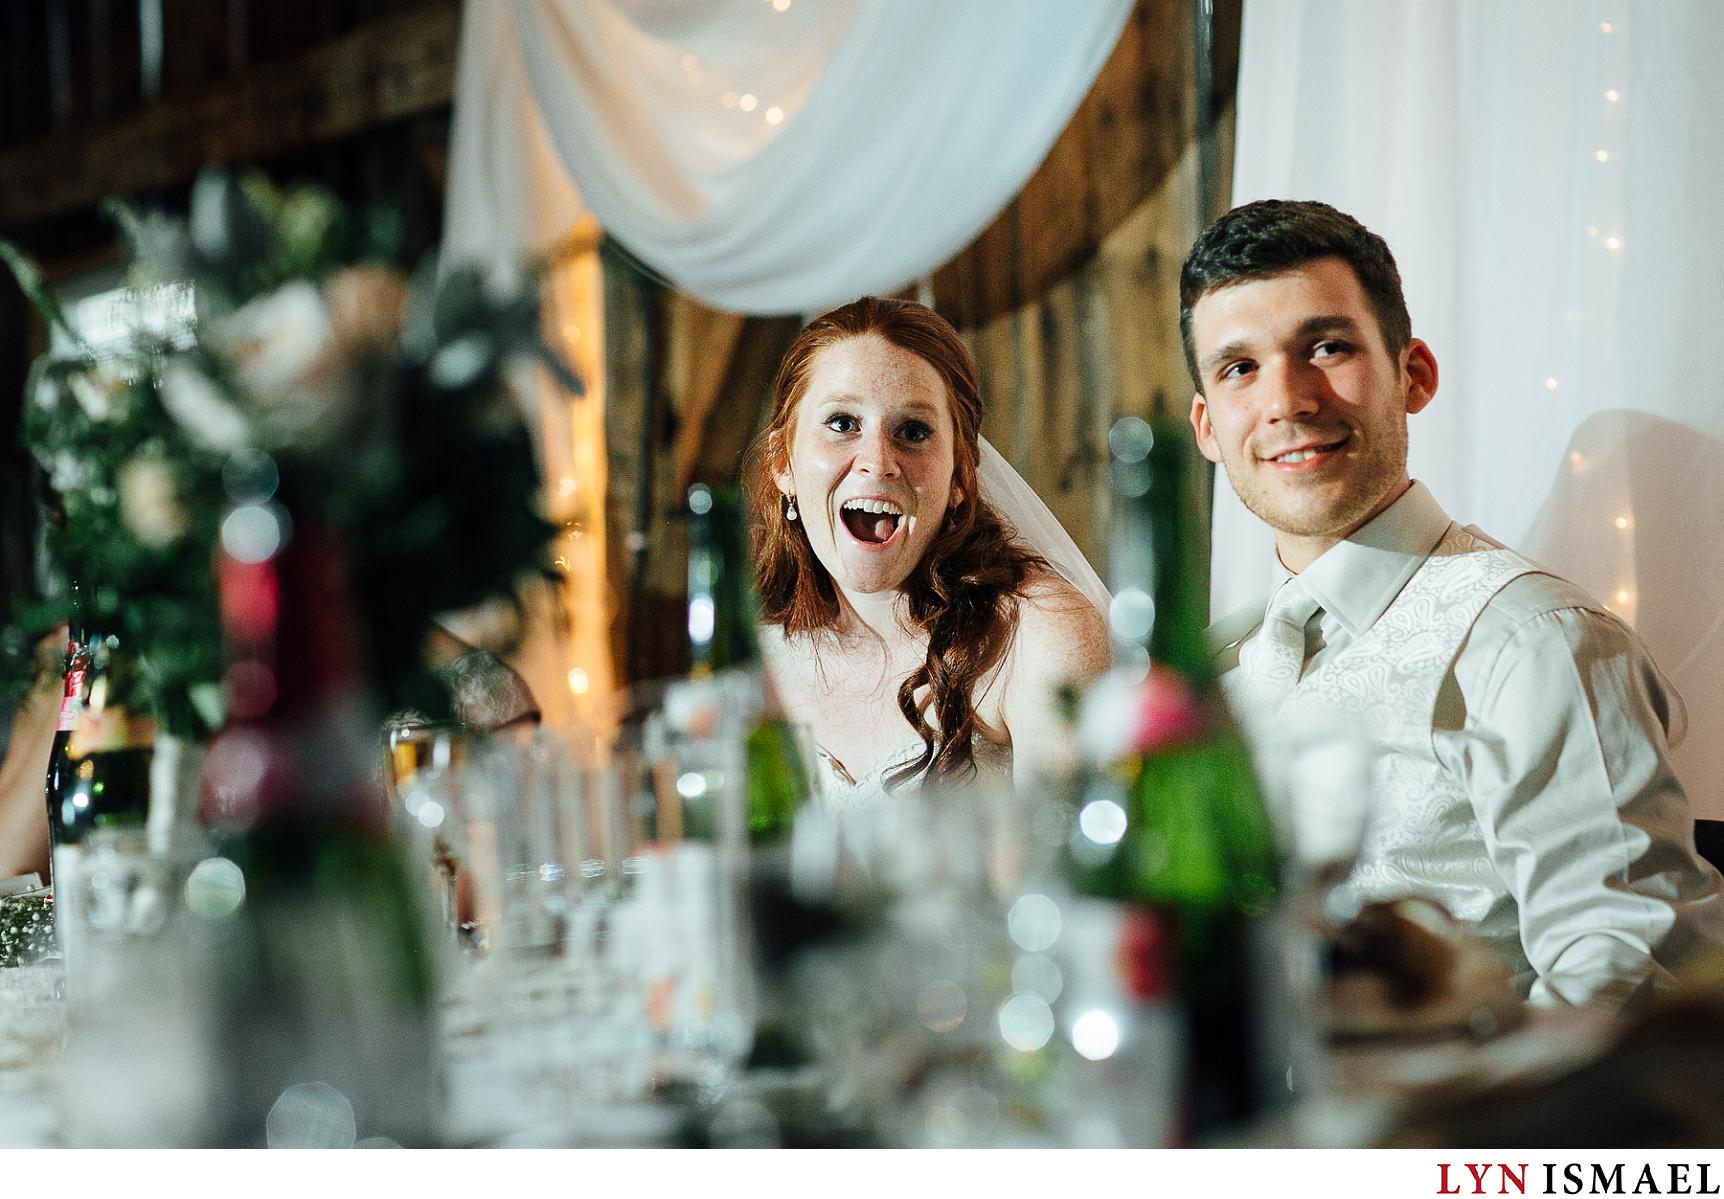 A funny reaction from the bride and groom.